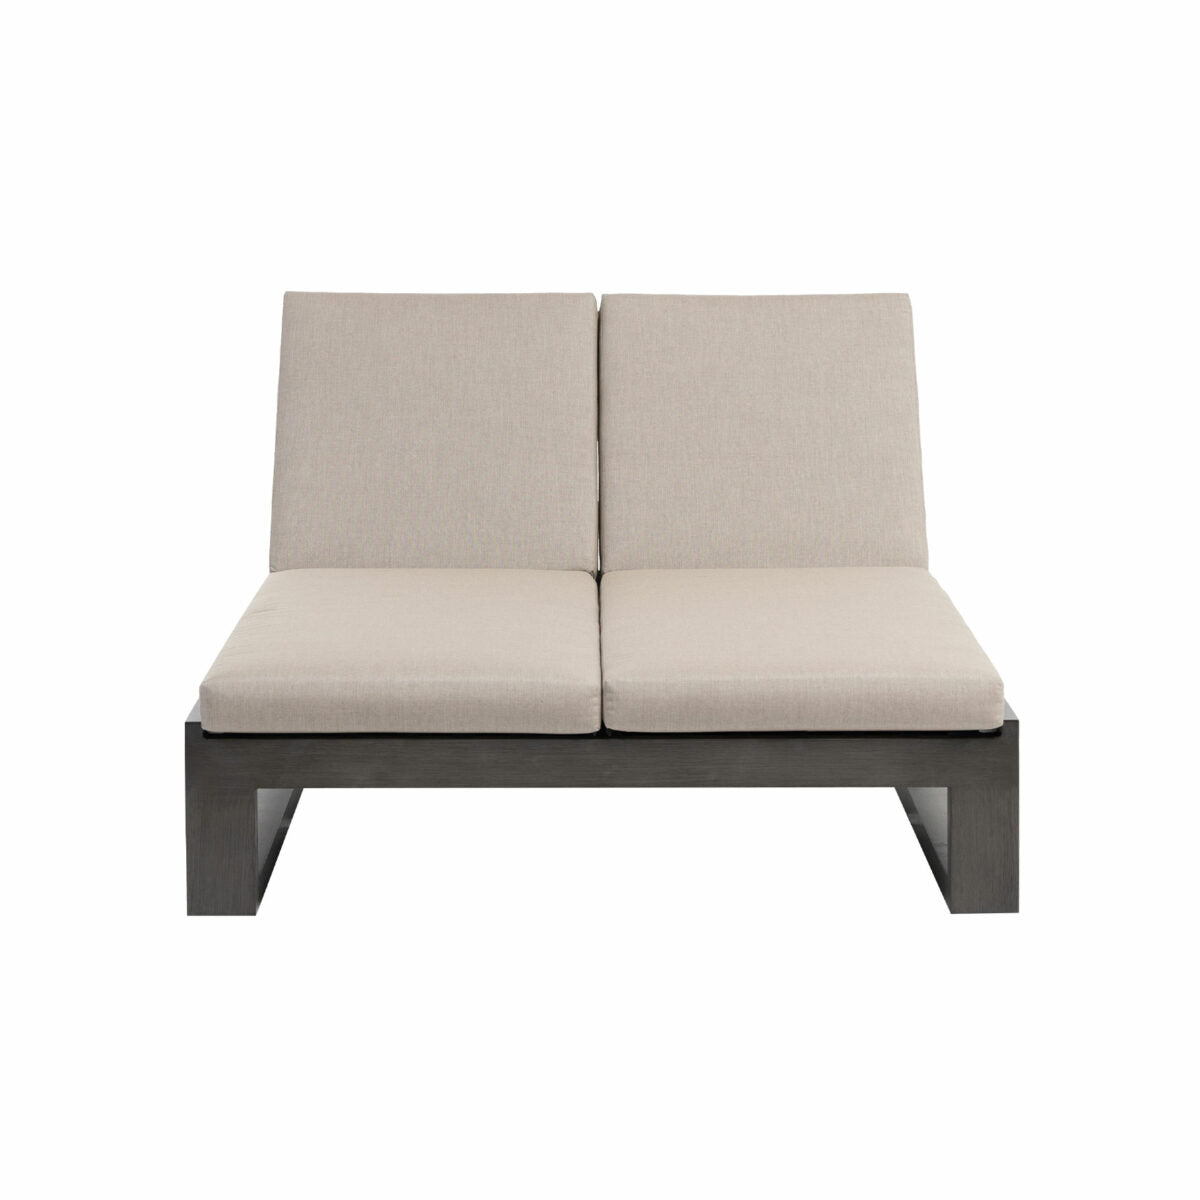 Element 5.0 Double Chaise Lounge